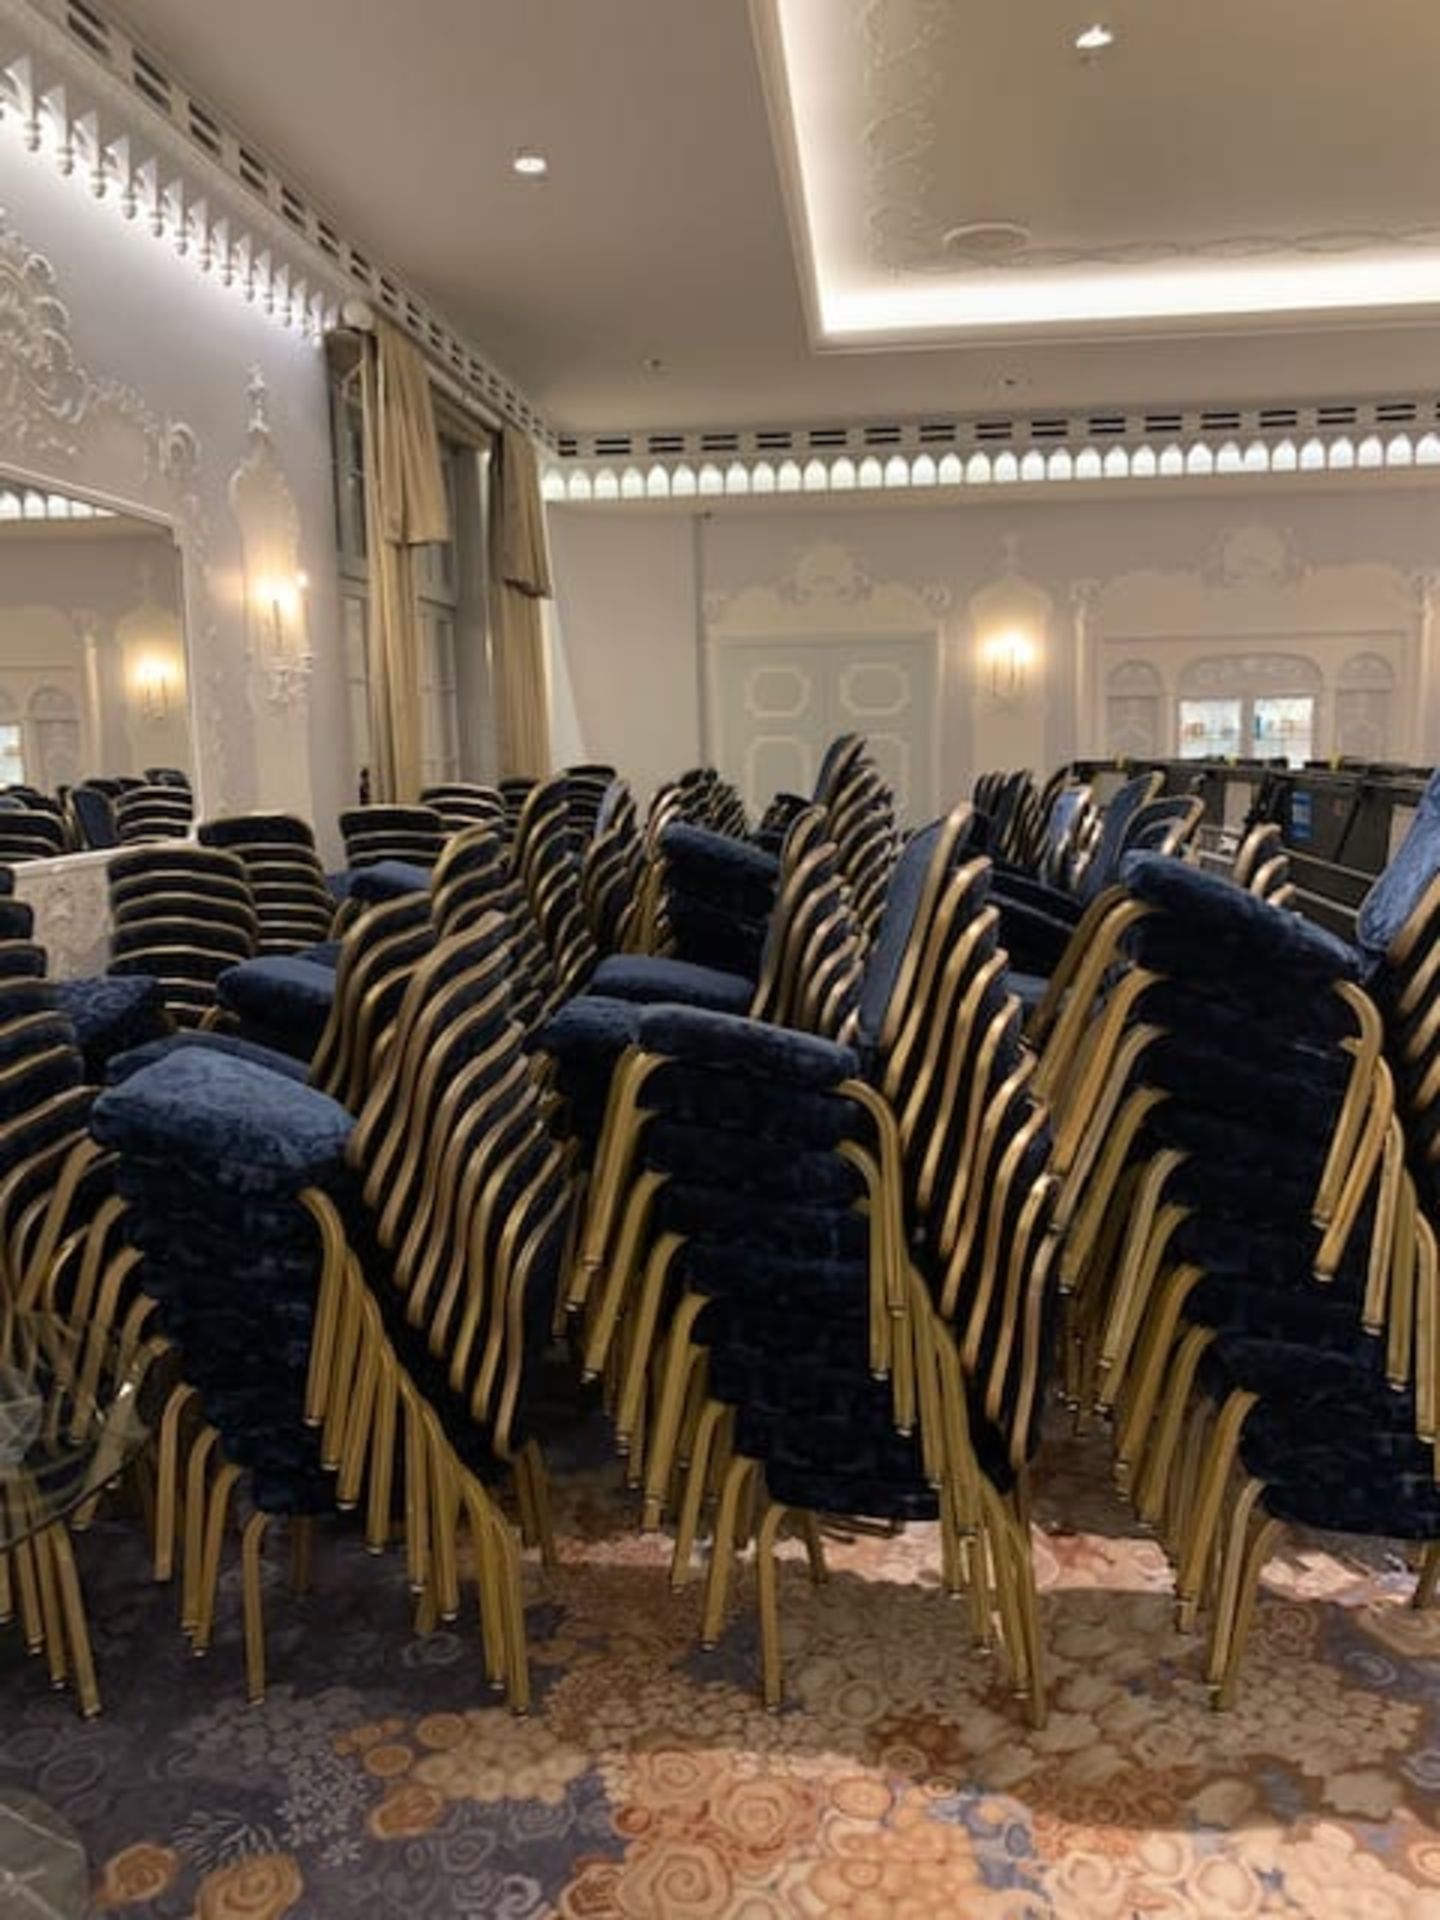 20 x Gasser USA premium stacking banquet chairs gold frame upholstered in blue damask Gasser's - Image 4 of 5